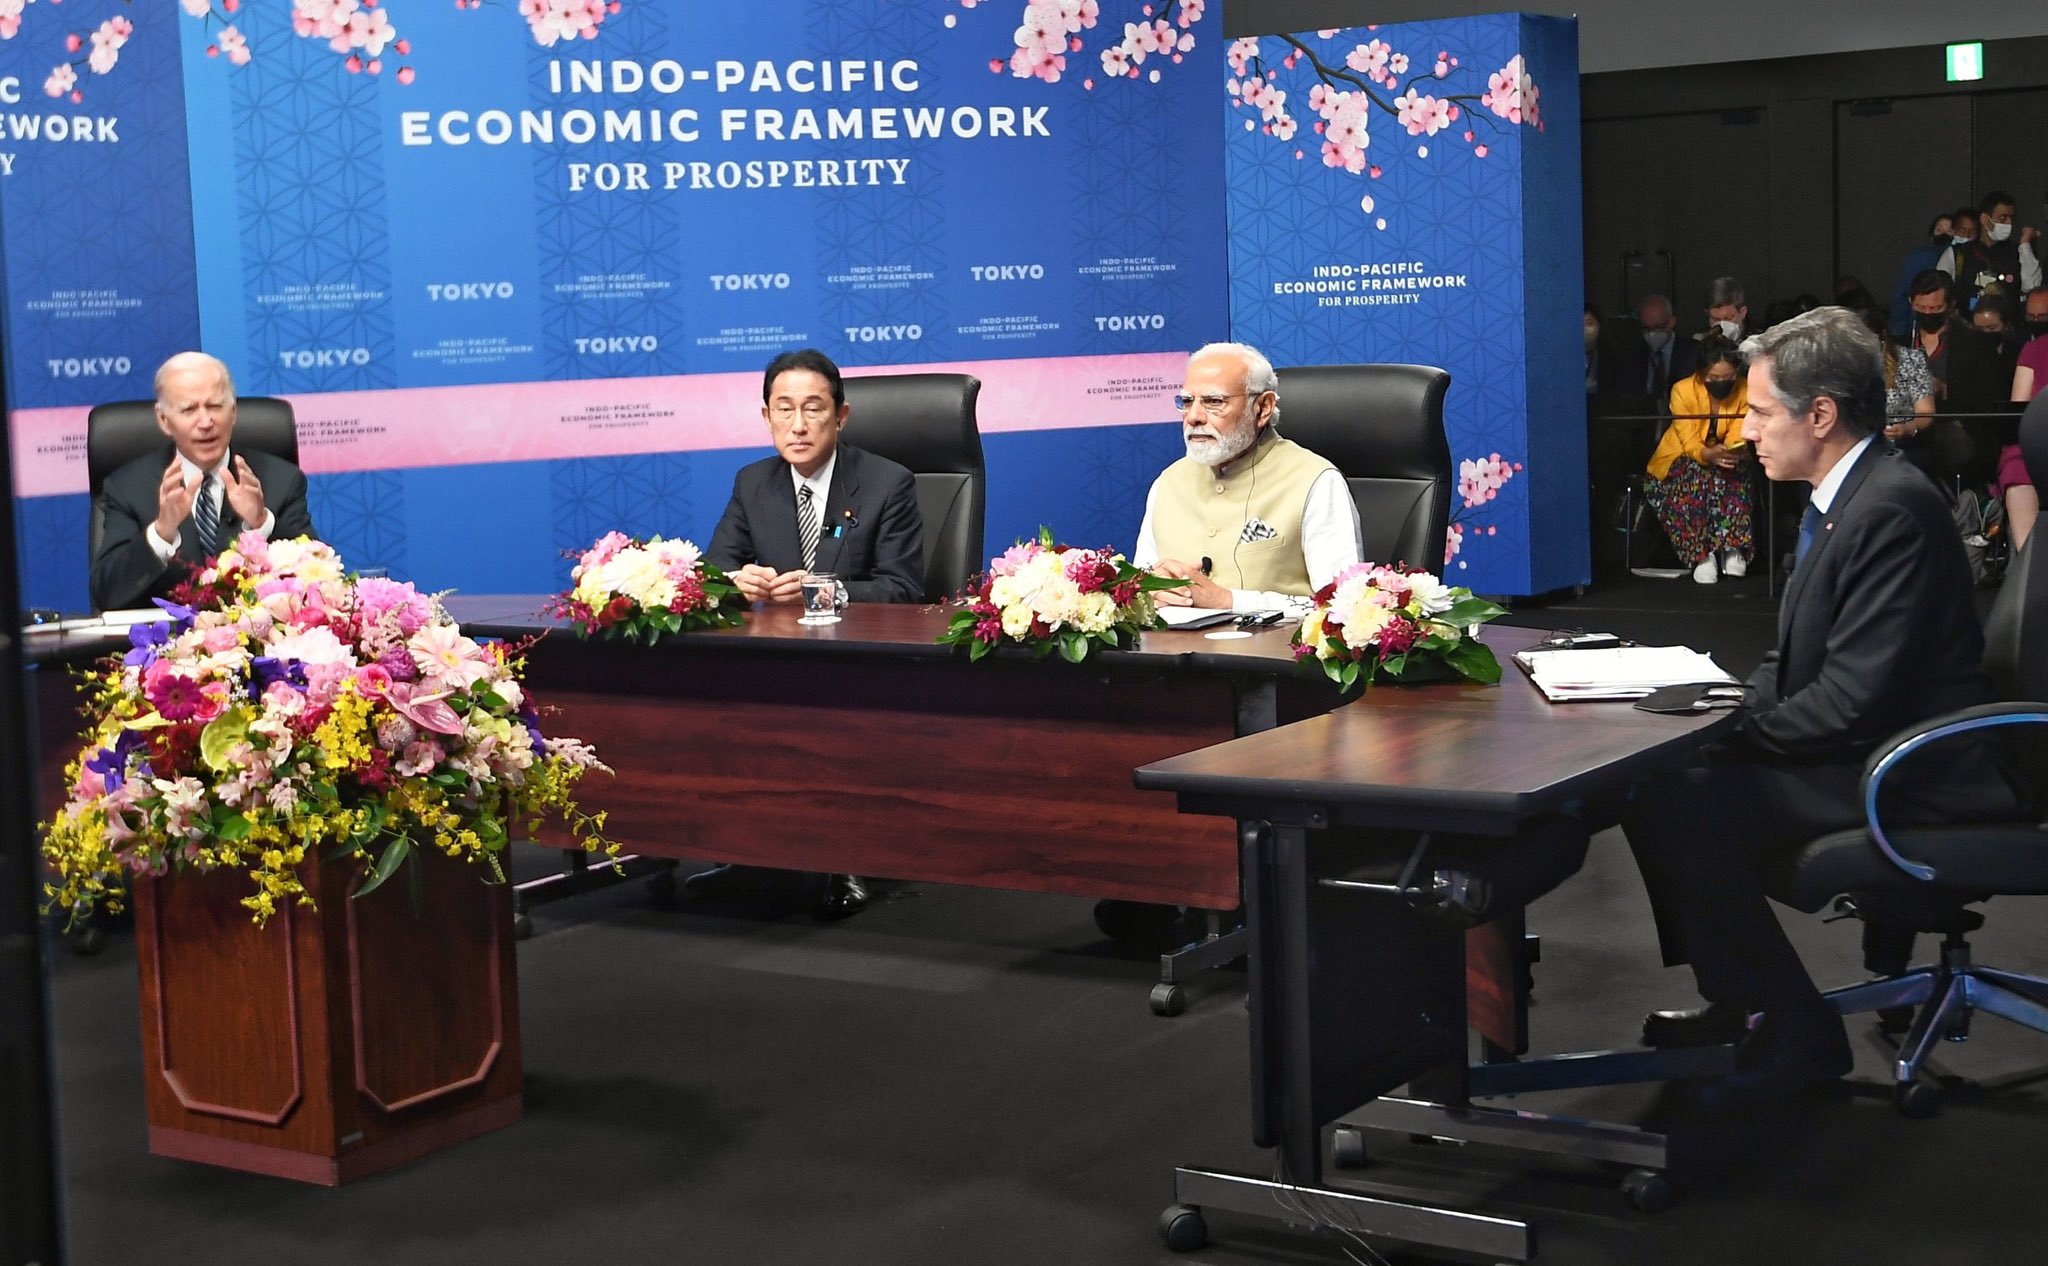 India commits to a free, open and inclusive Indo-Pacific region